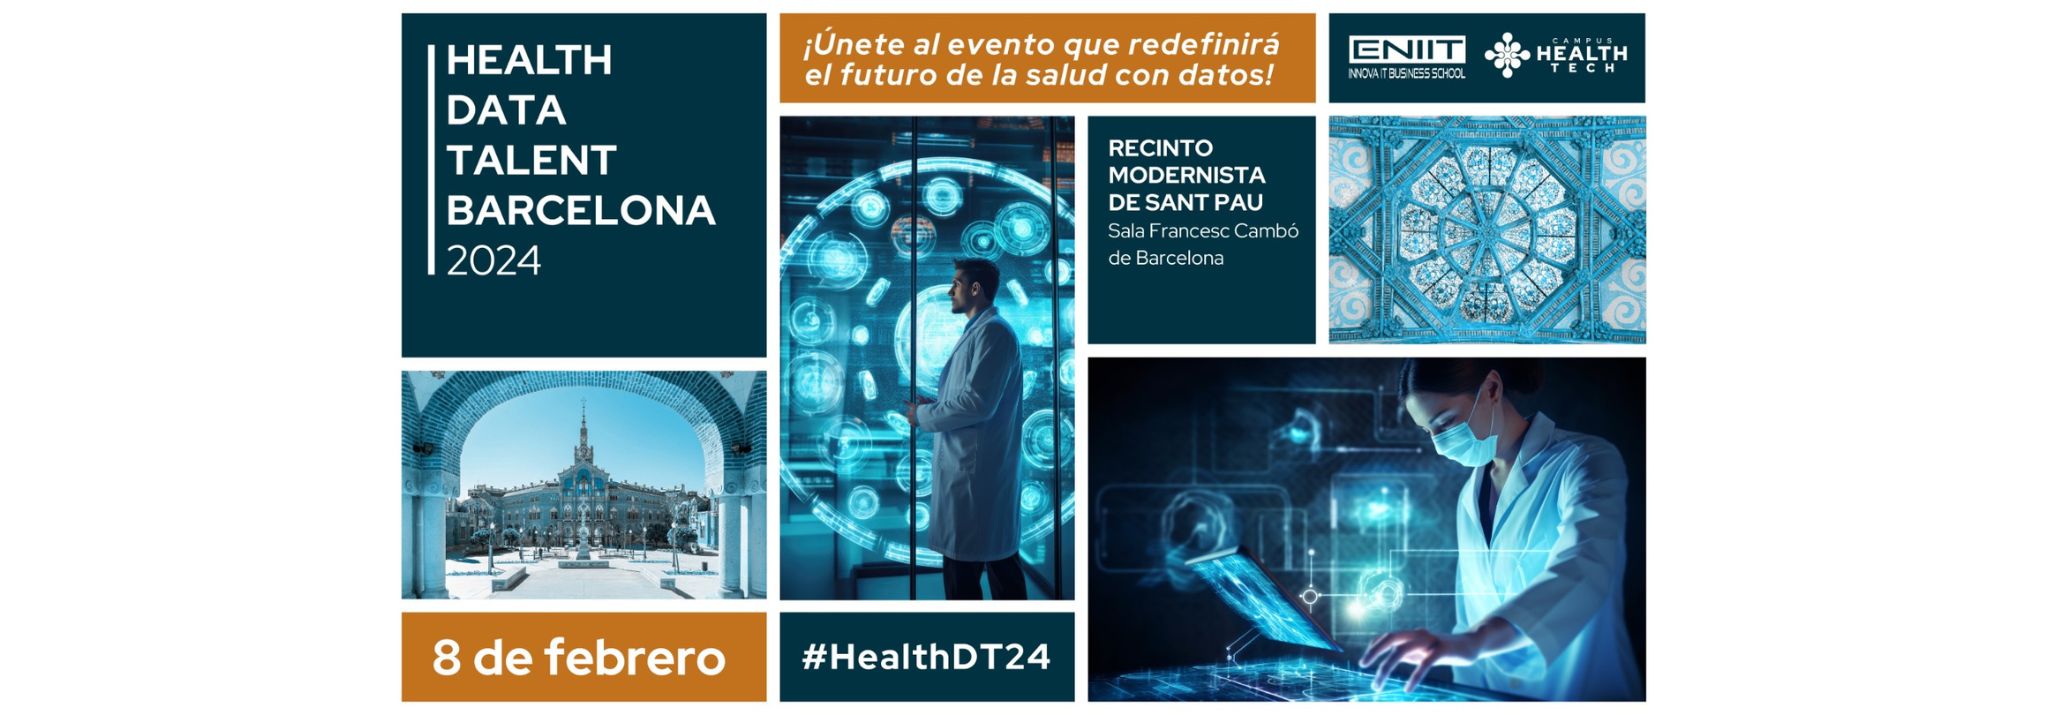 Save the date for the Health Data Talent Barcelona